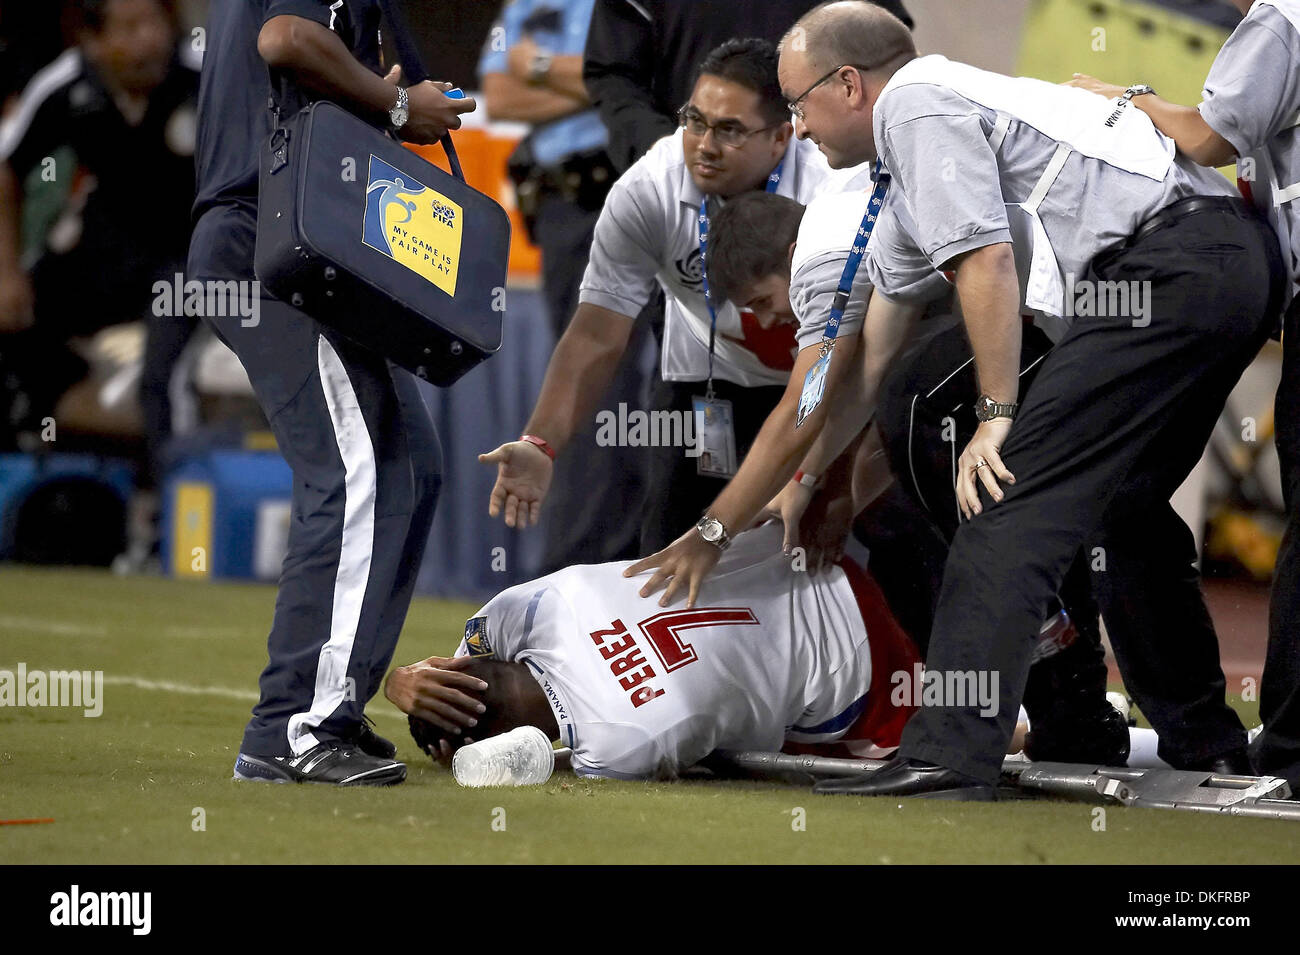 Jul 10, 2009 - Houston, Texas, USA - While being carried off the field, BLAS PEREZ (#7) of Panama is by an bottle thrown at him from the stands.  Panama and Mexico tied 1-1 at Reliant Stadium. (Credit Image: © Diana Porter/Southcreek Global/ZUMA Press) Stock Photo